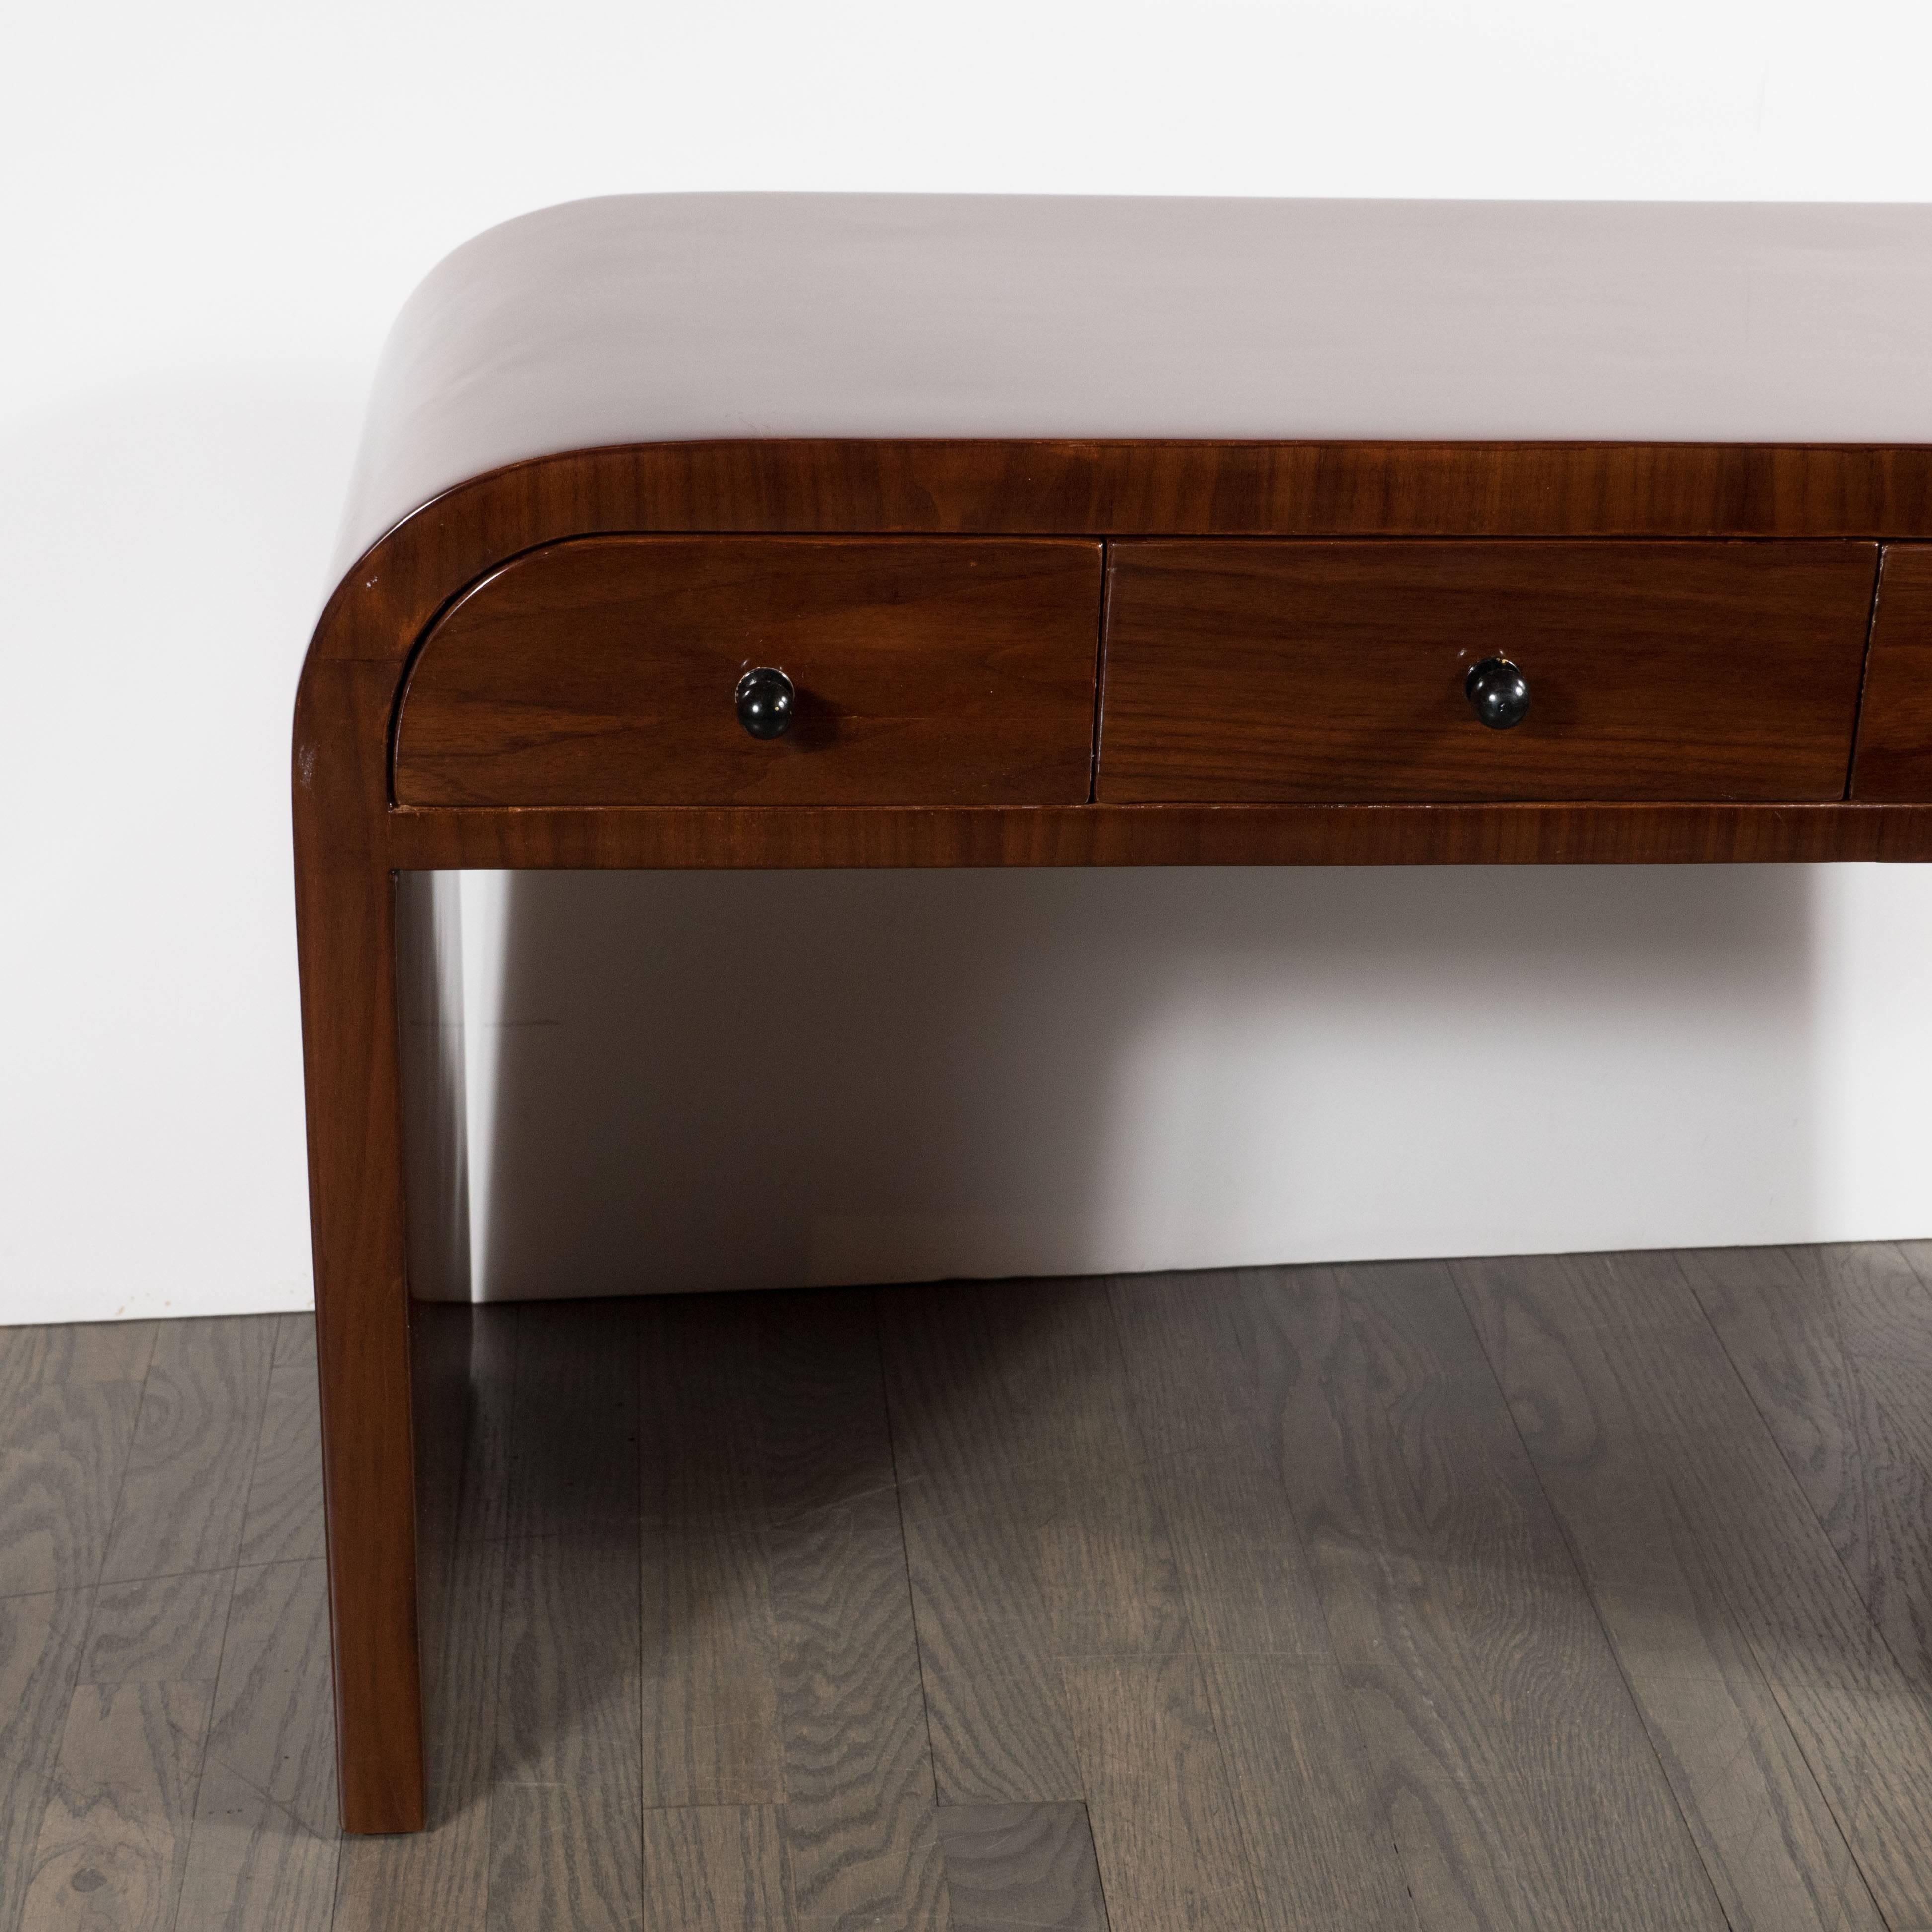 This refined pair of Art Deco end tables or nightstands were realized in the United States, circa 1935. They are an exceptional example of the time and place. They offer streamlined bodies, with elegantly sloping sides, and three drawers each with